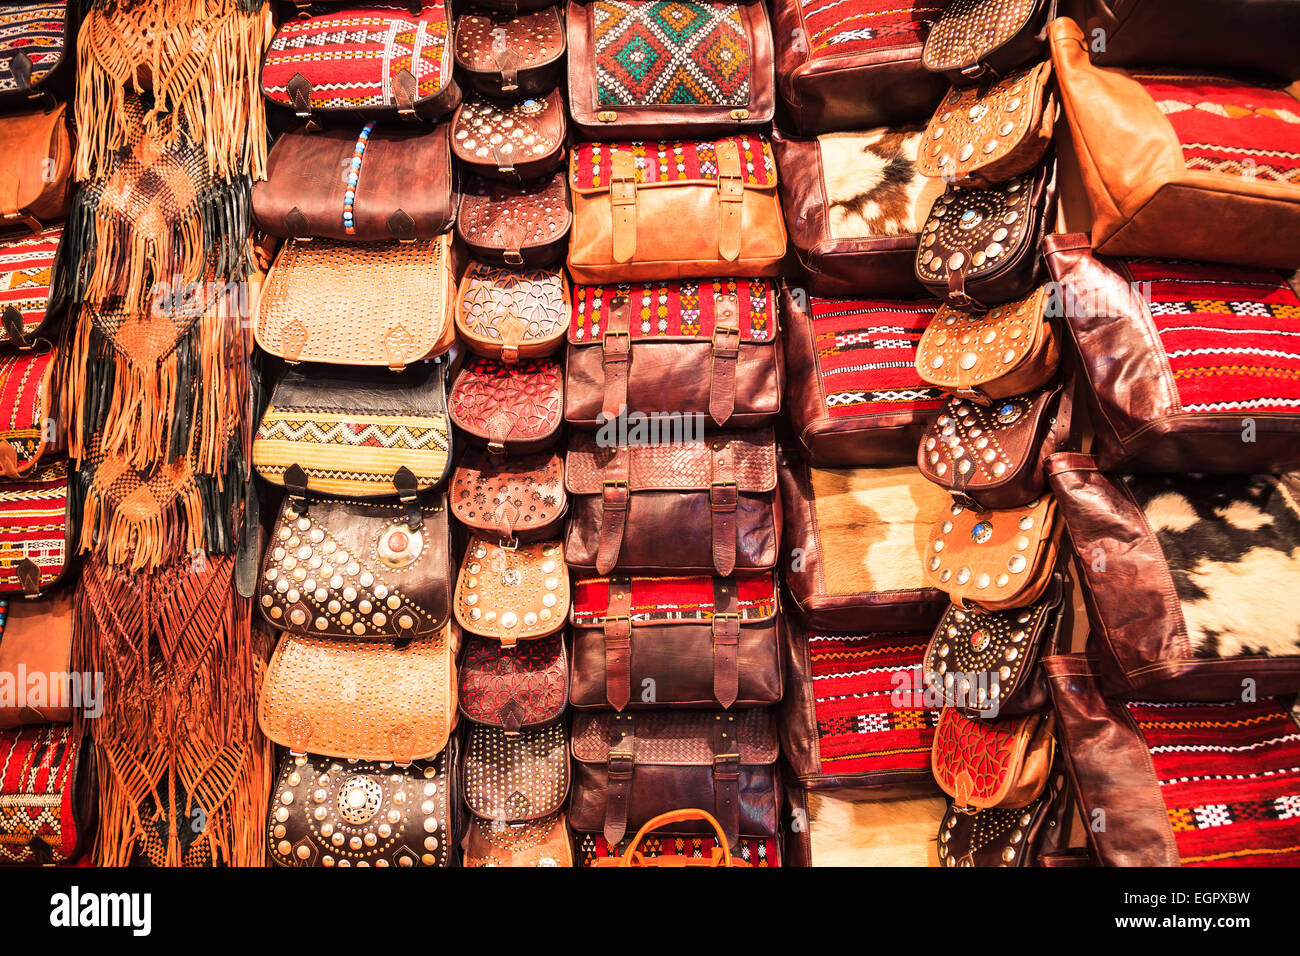 Moroccan leather bag in fez, morocco Stock Photo